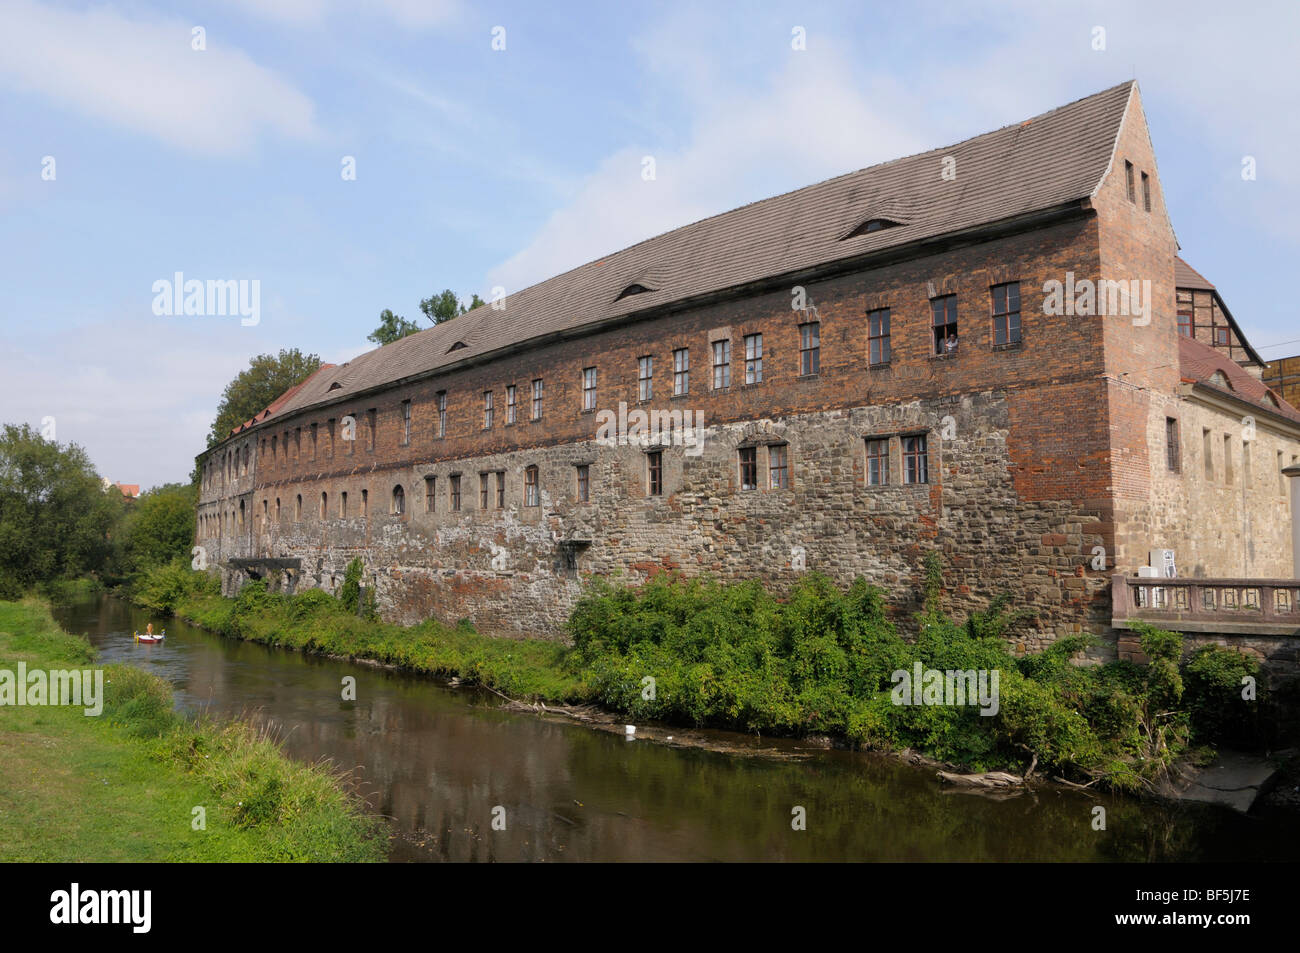 New Residence with Geiseltalmuseum, Halle an der Saale, Sachsen-Anhalt, Germany, Europe Stock Photo